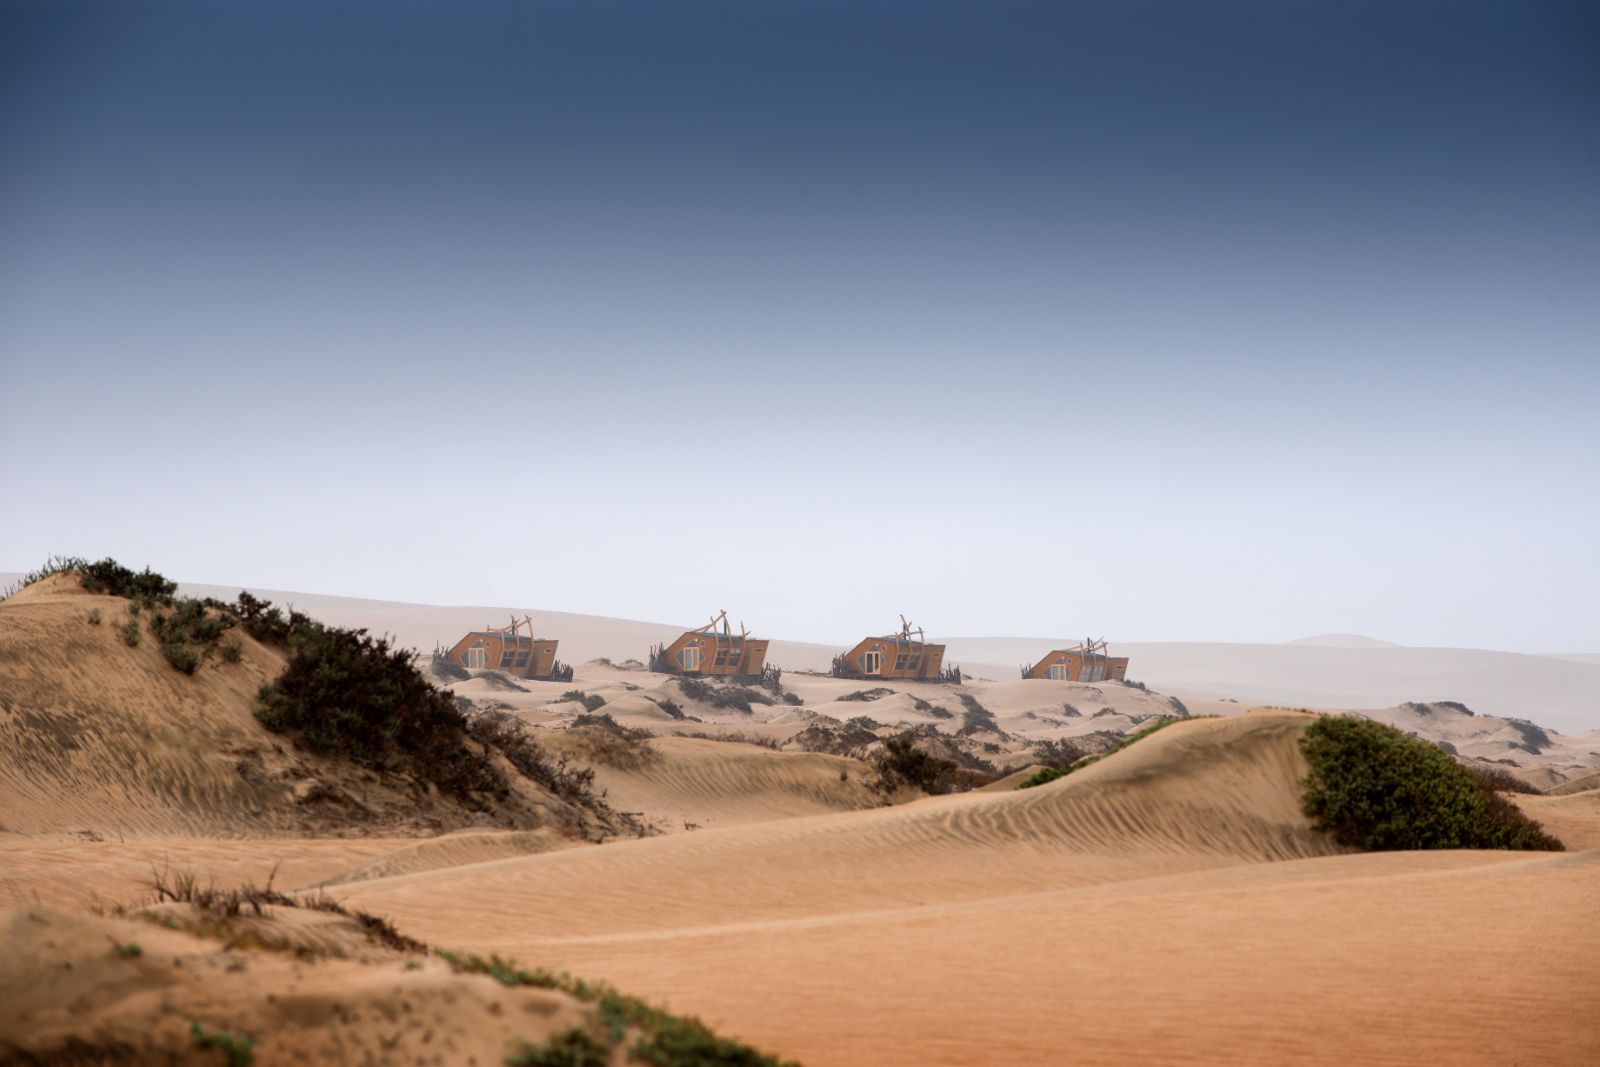 Exterior view of the cabins at luxury lodge Shipwreck Lodge in the Skeleton Coast National Park, Namibia